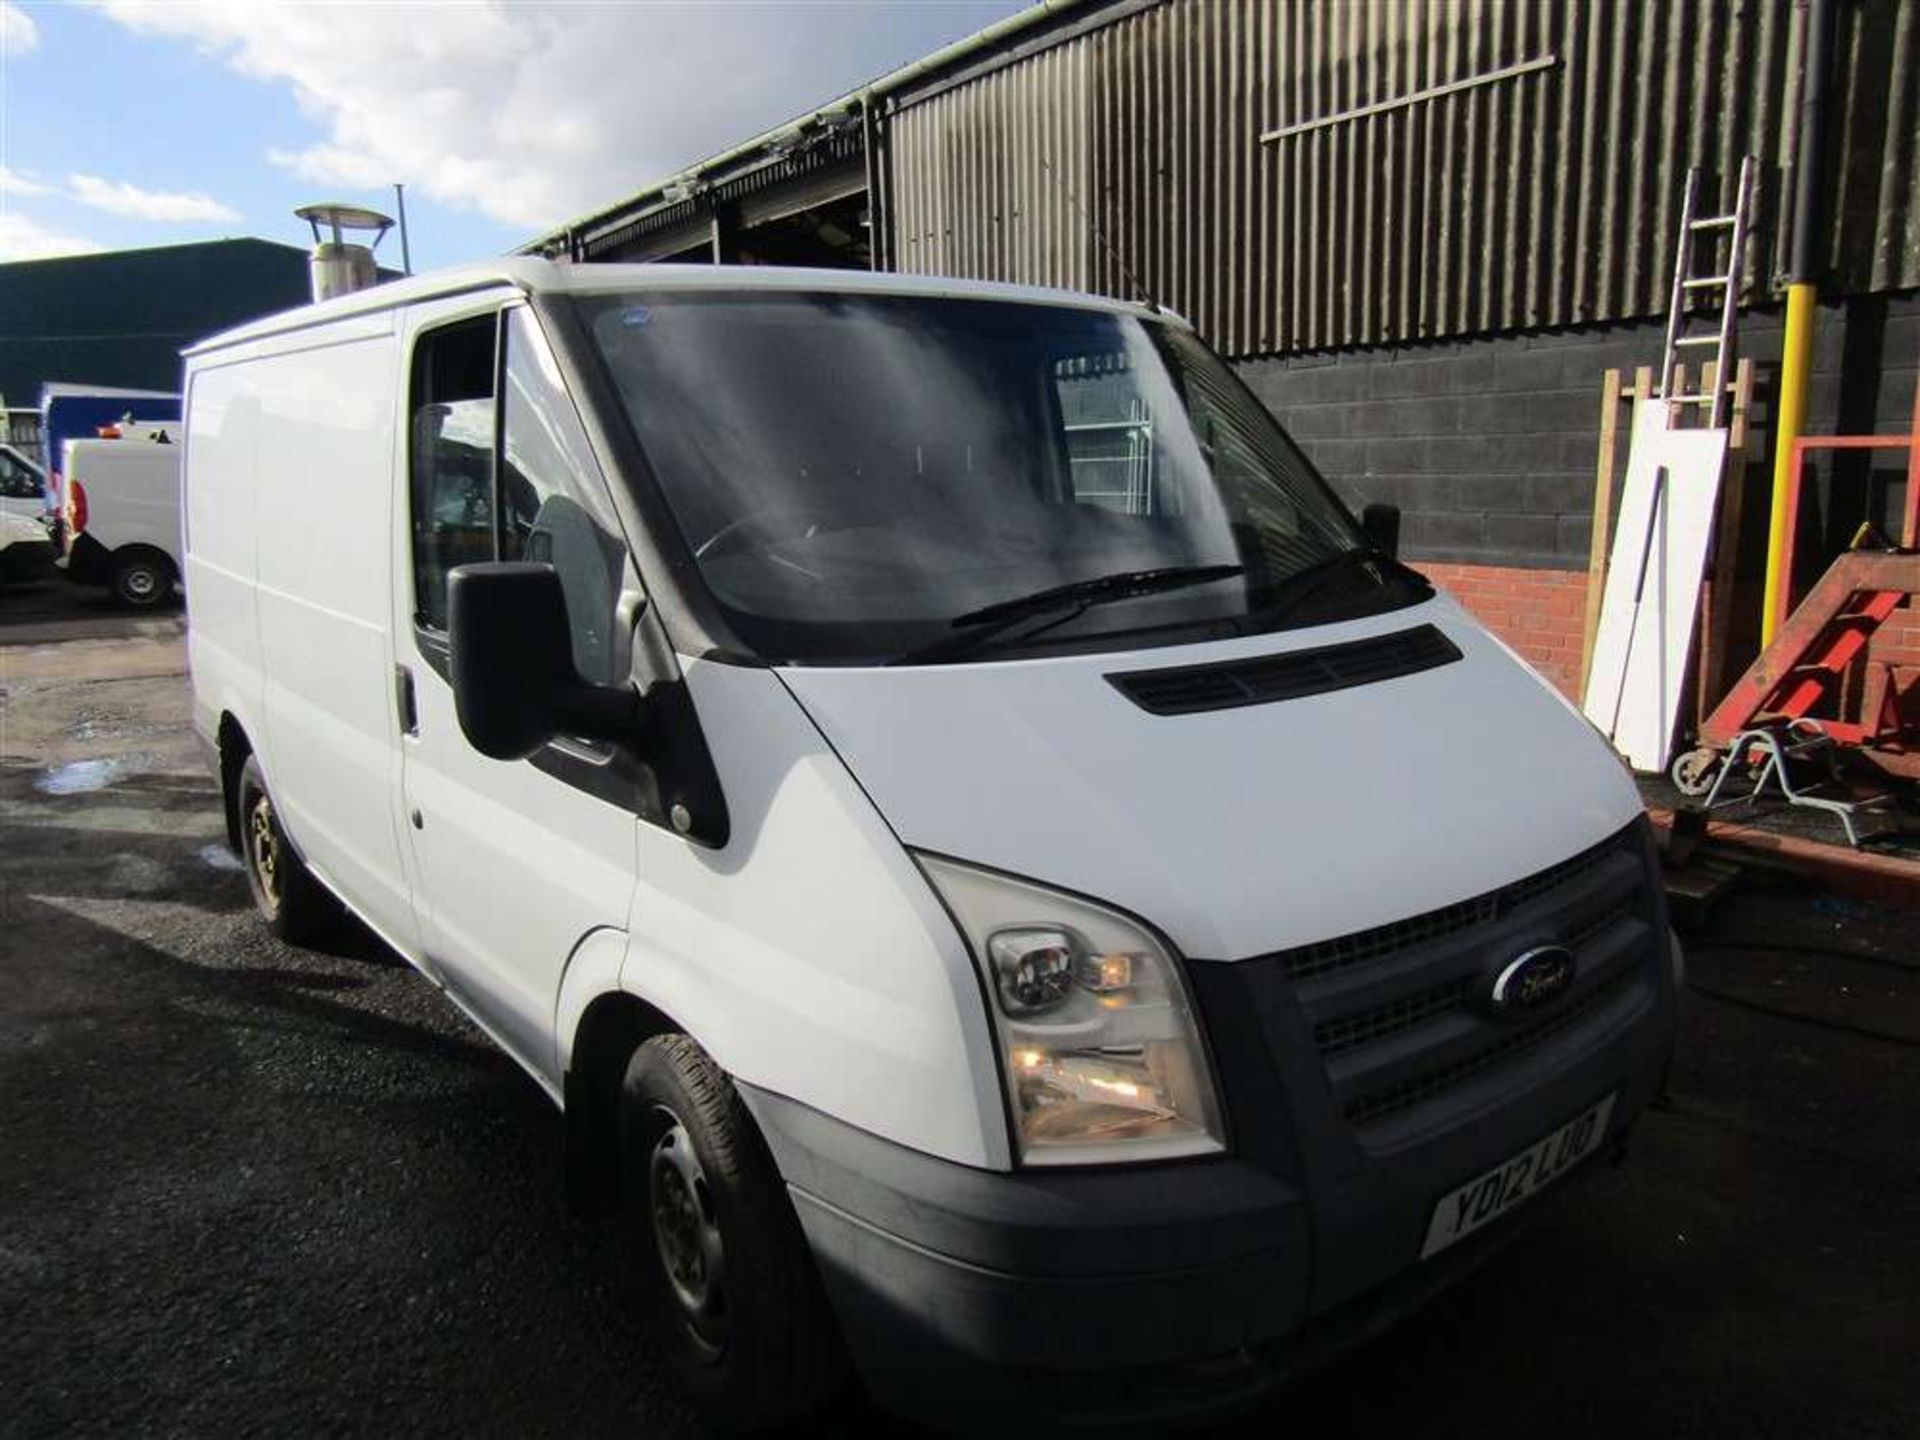 2012 12 reg Ford Transit 125 T280 FWD (Direct Council)